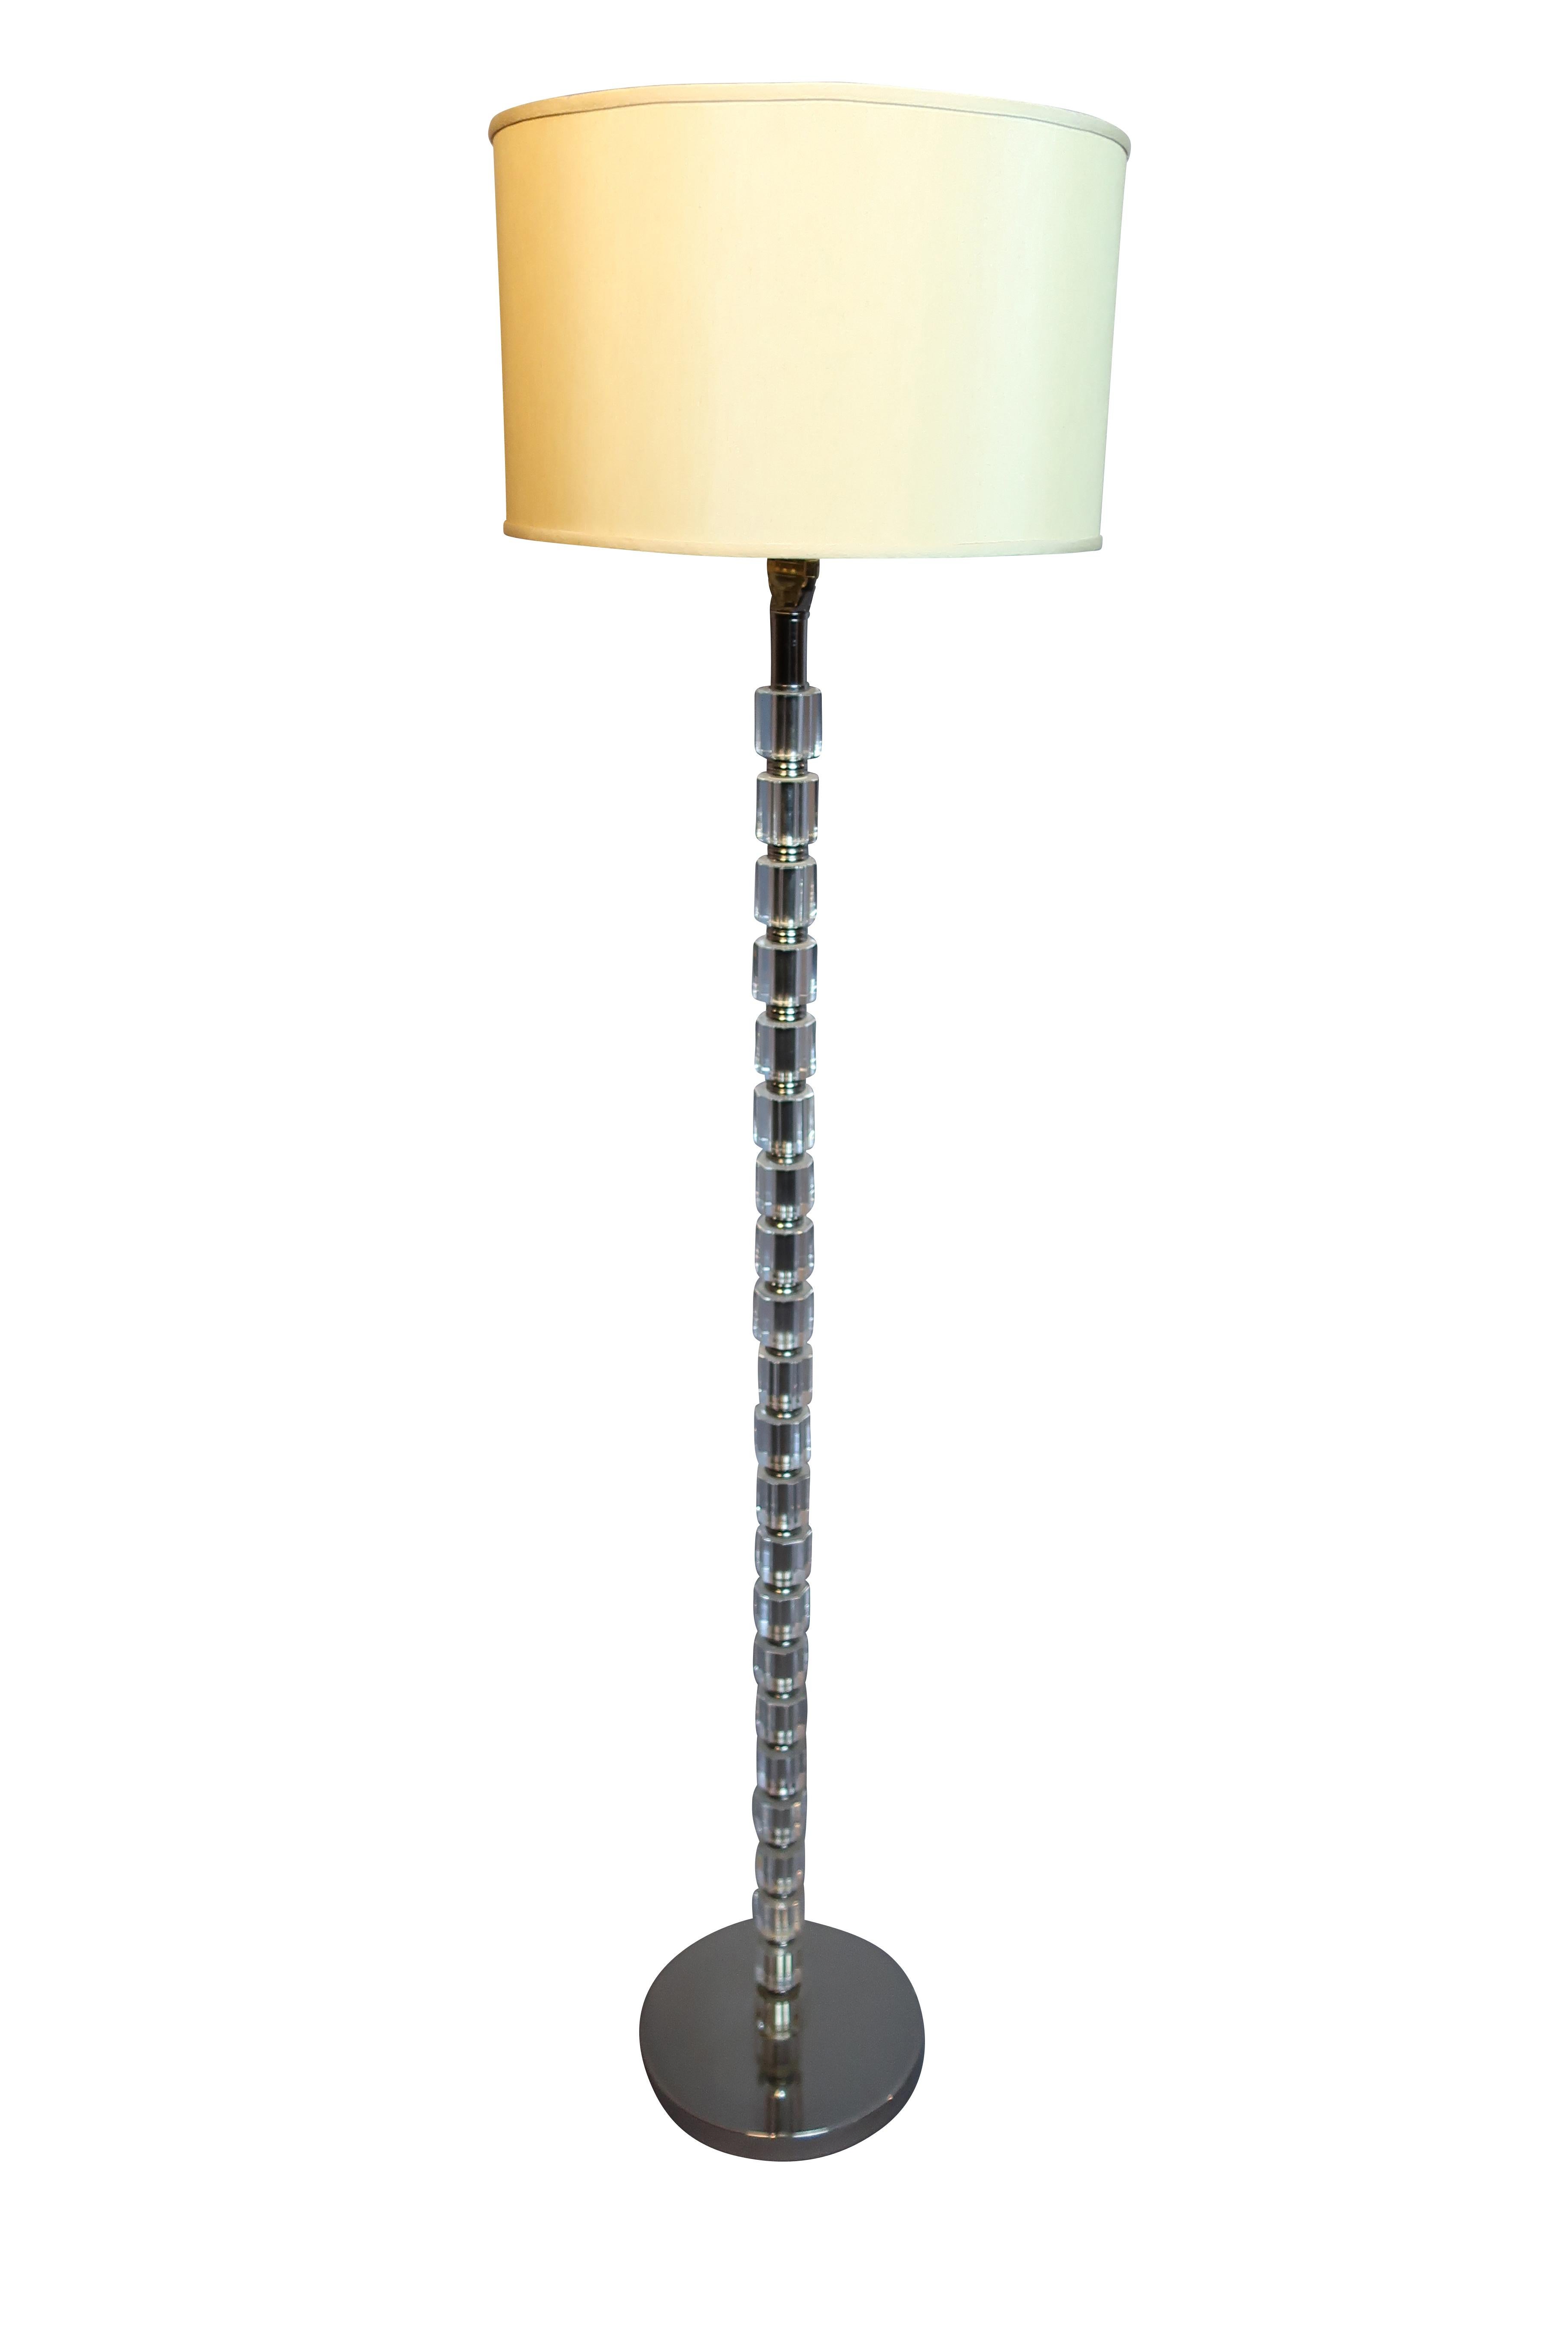 Crystal floor lamp with faceted glass pole and chrome base, contemporary styling with an off white linen drum shade. Measures: 62 inches high, with shade, the base is 10 inches in diameter, shade measures 15.25.